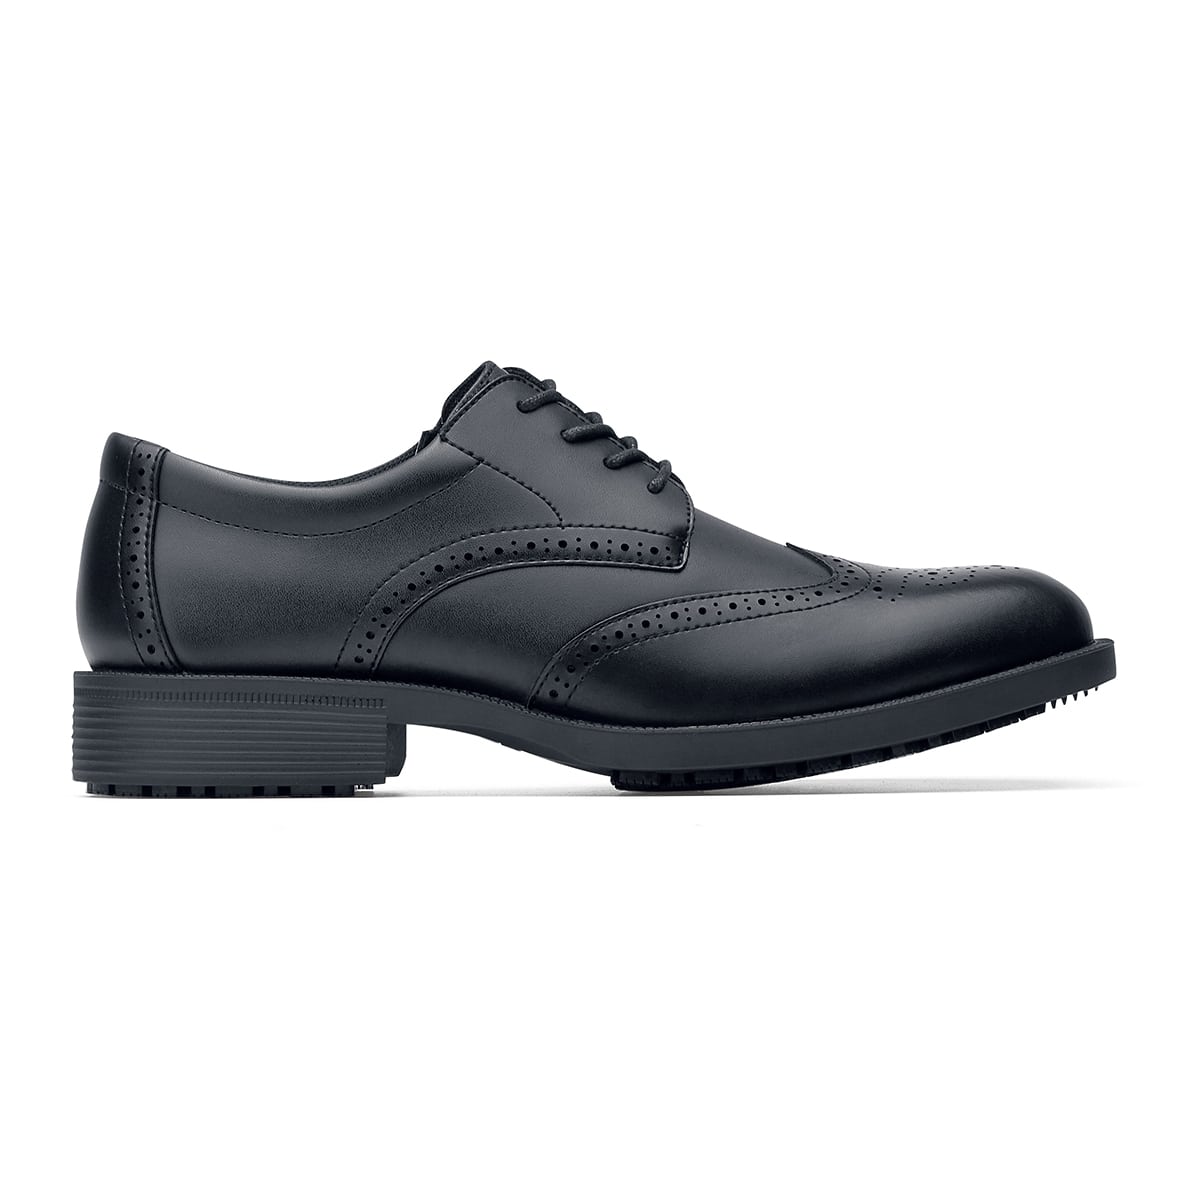 The Executive Wing Tip IV from Shoes For Crews, is an slip resistant dress shoe with a water resistant breathable leather upper to provide industry leading levels of grip and durability, seen from the right.